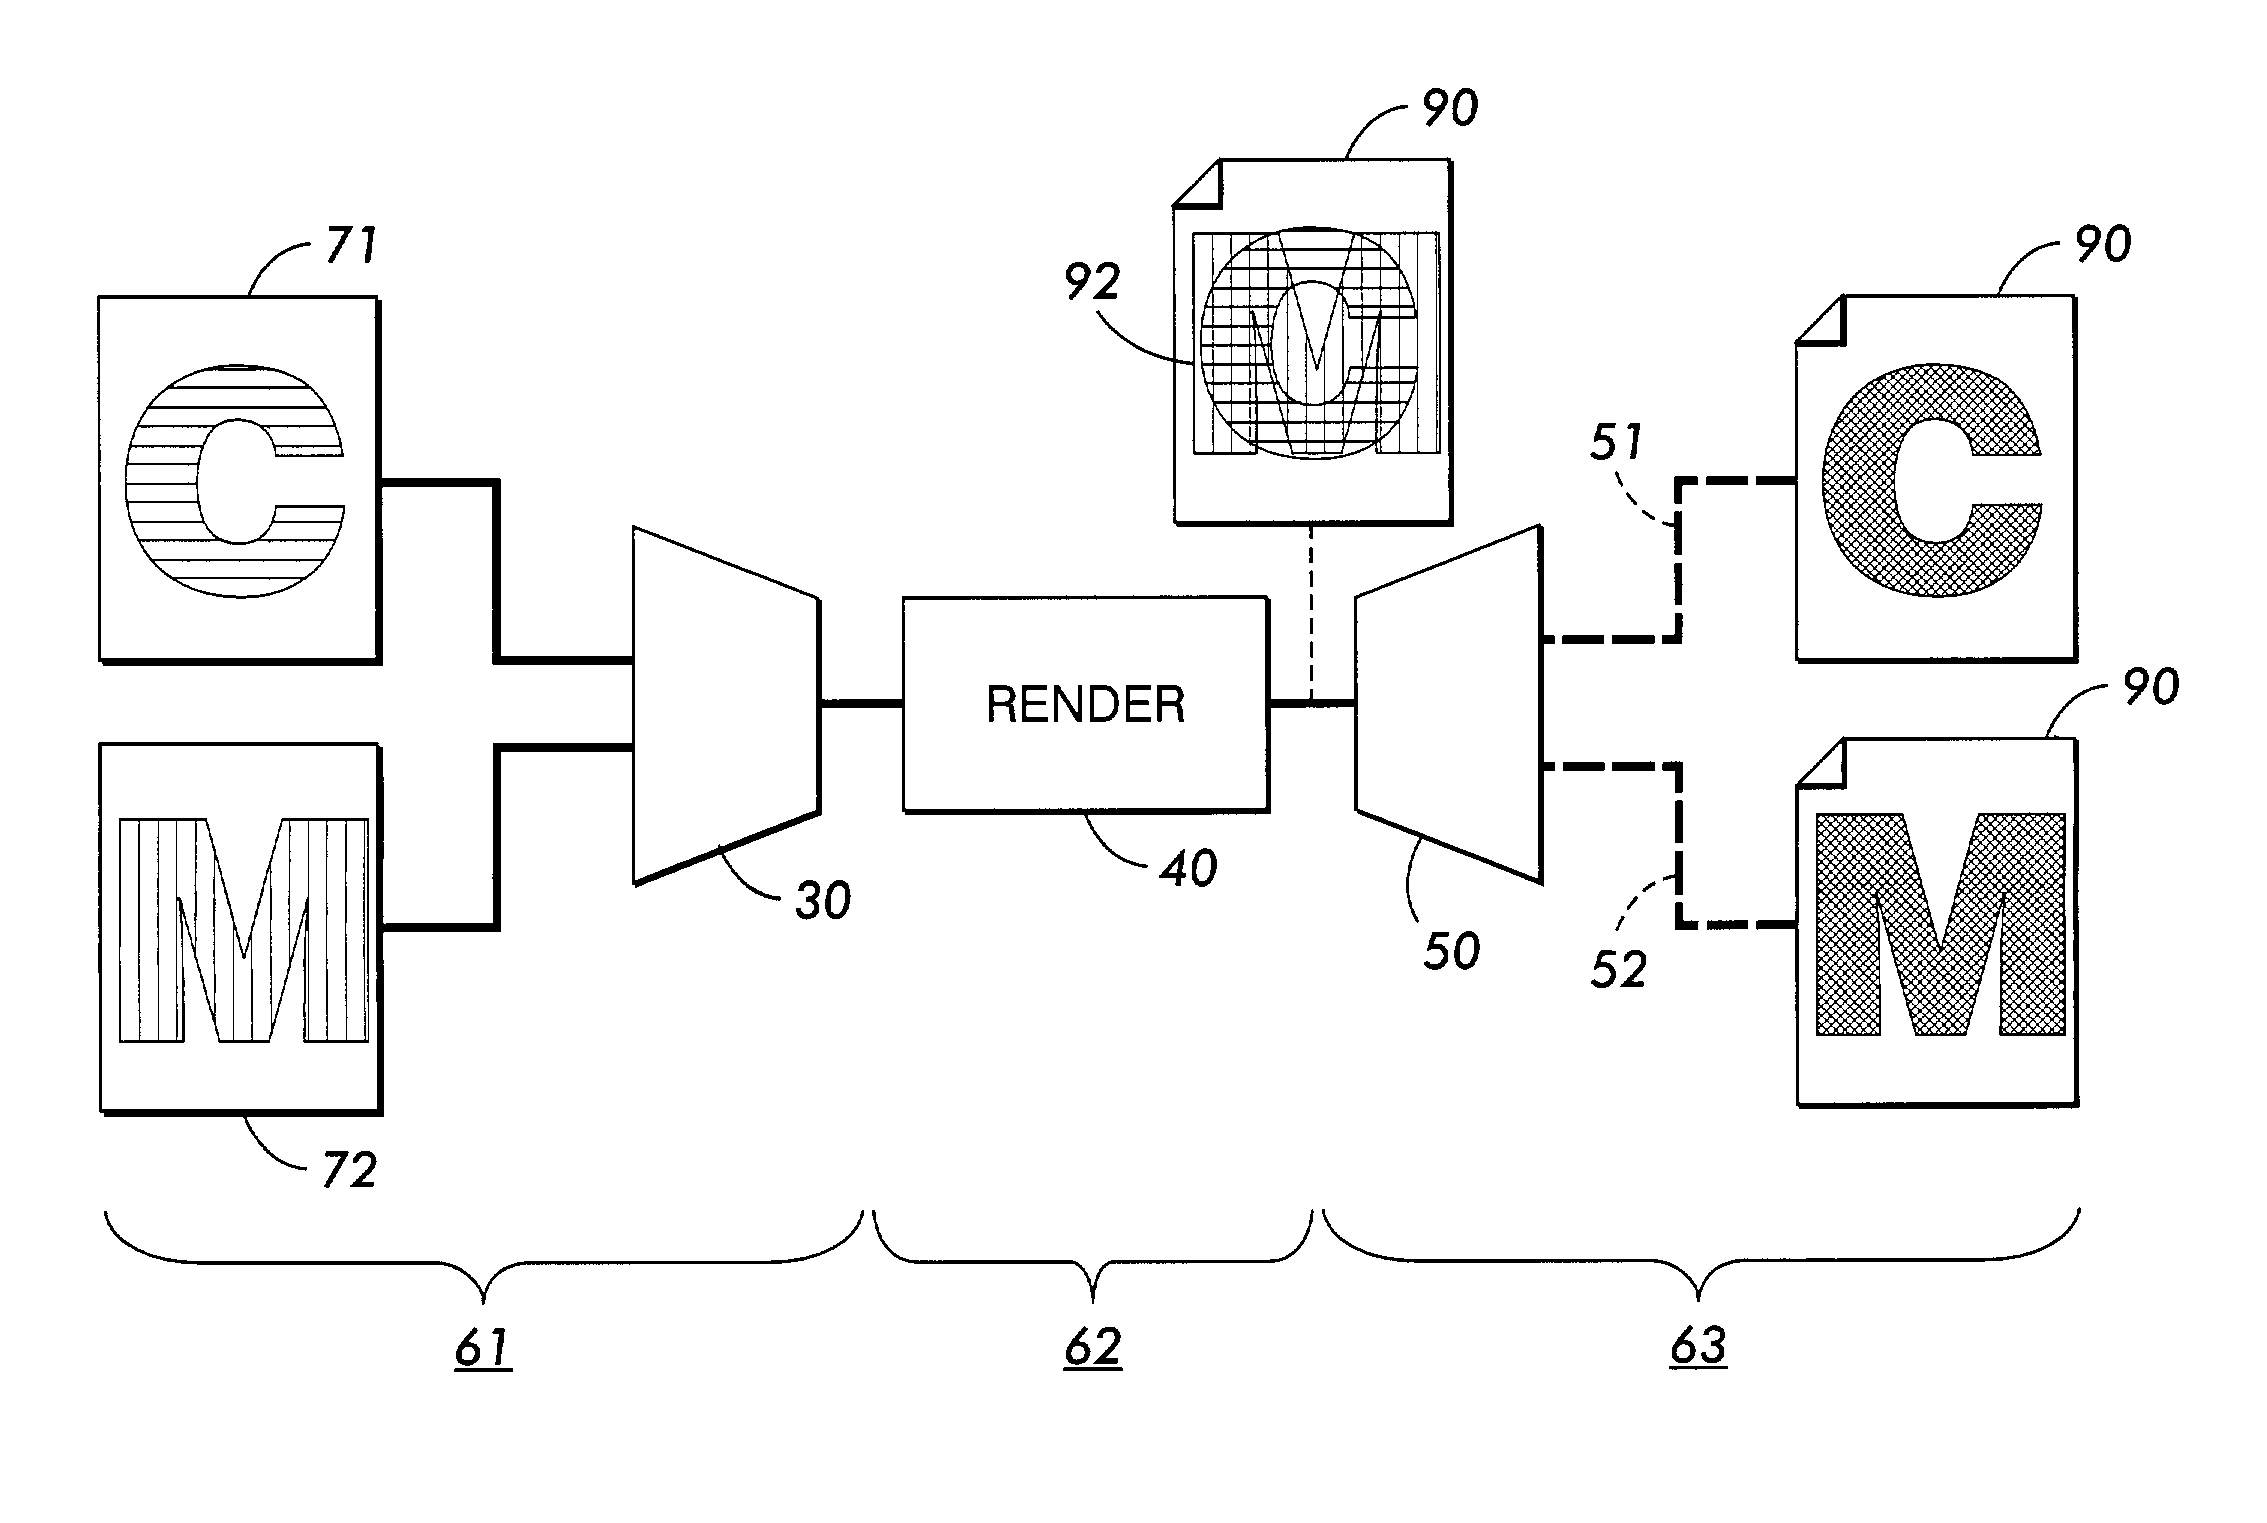 Systems for spectral multiplexing of source images to provide a composite image, for rendering the composite image, and for spectral demultiplexing the composite image, which achieve increased dynamic range in a recovered source image